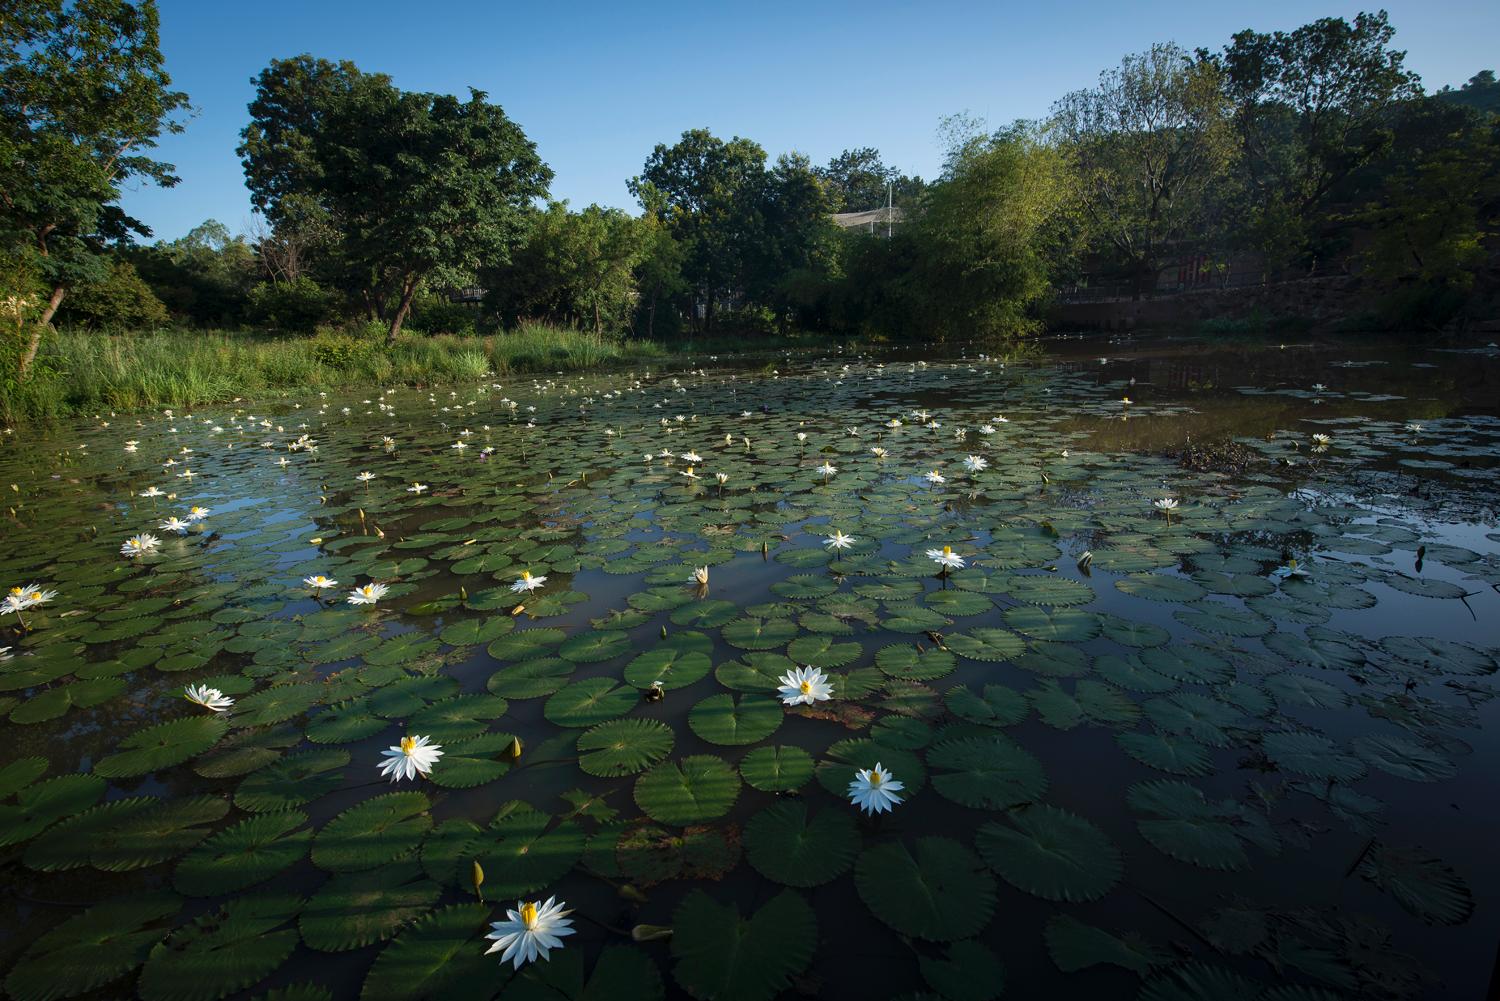 Water lilies float on the pond